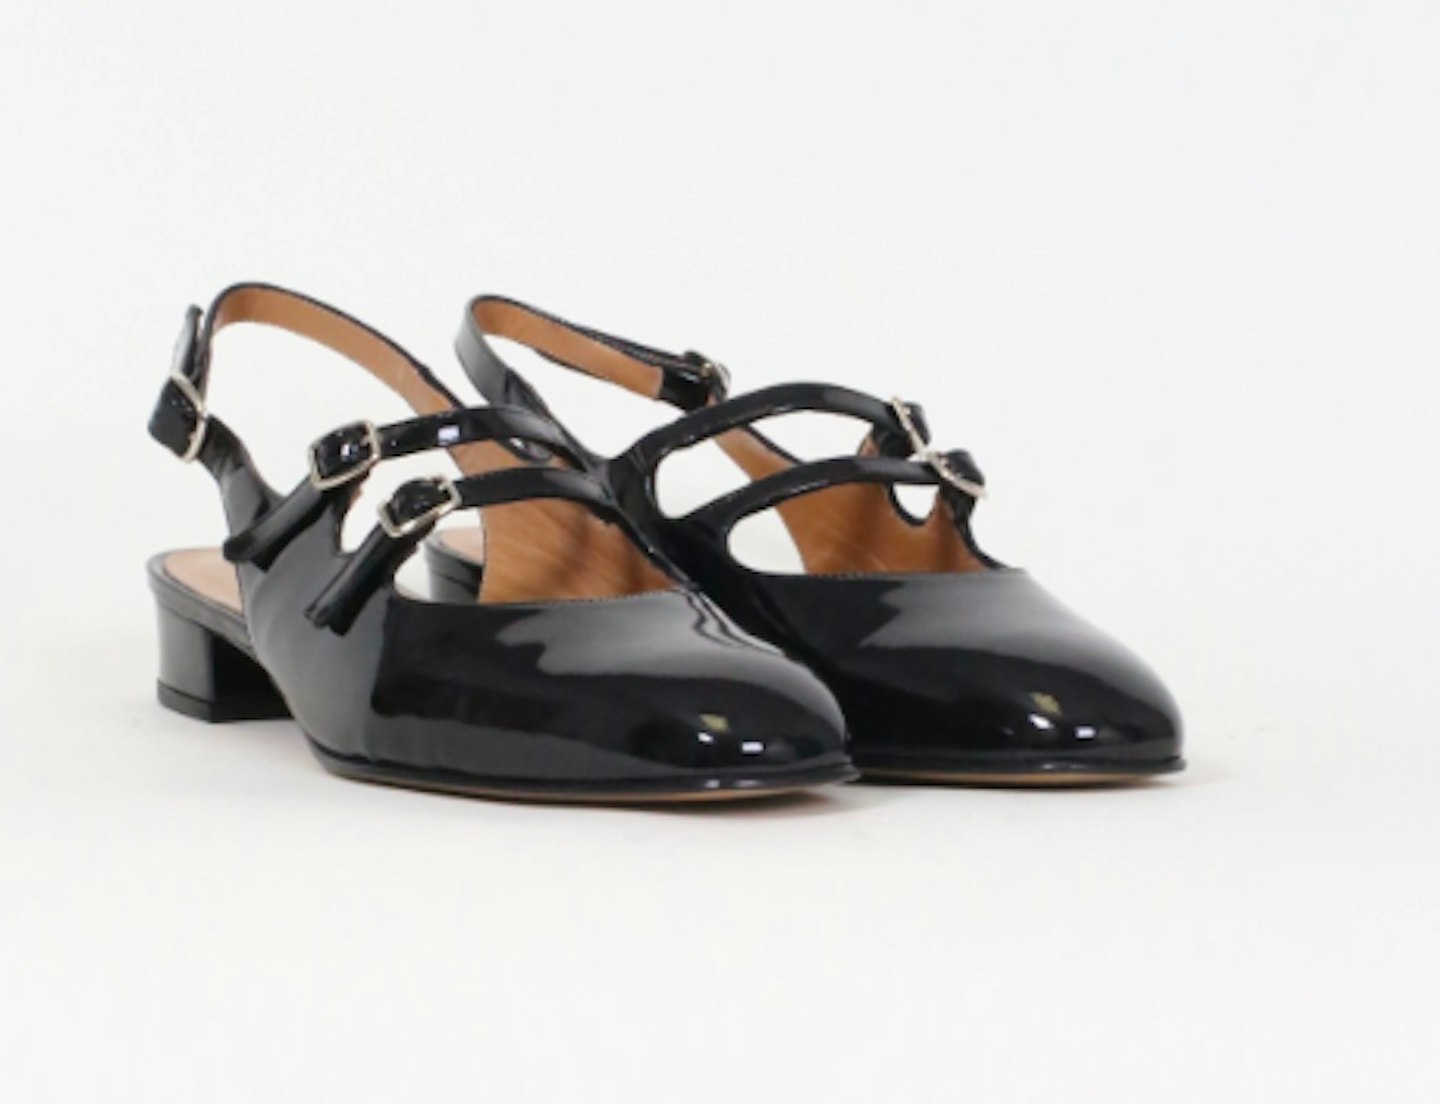 Carel, Peche Leather Black Mary Janes, £240